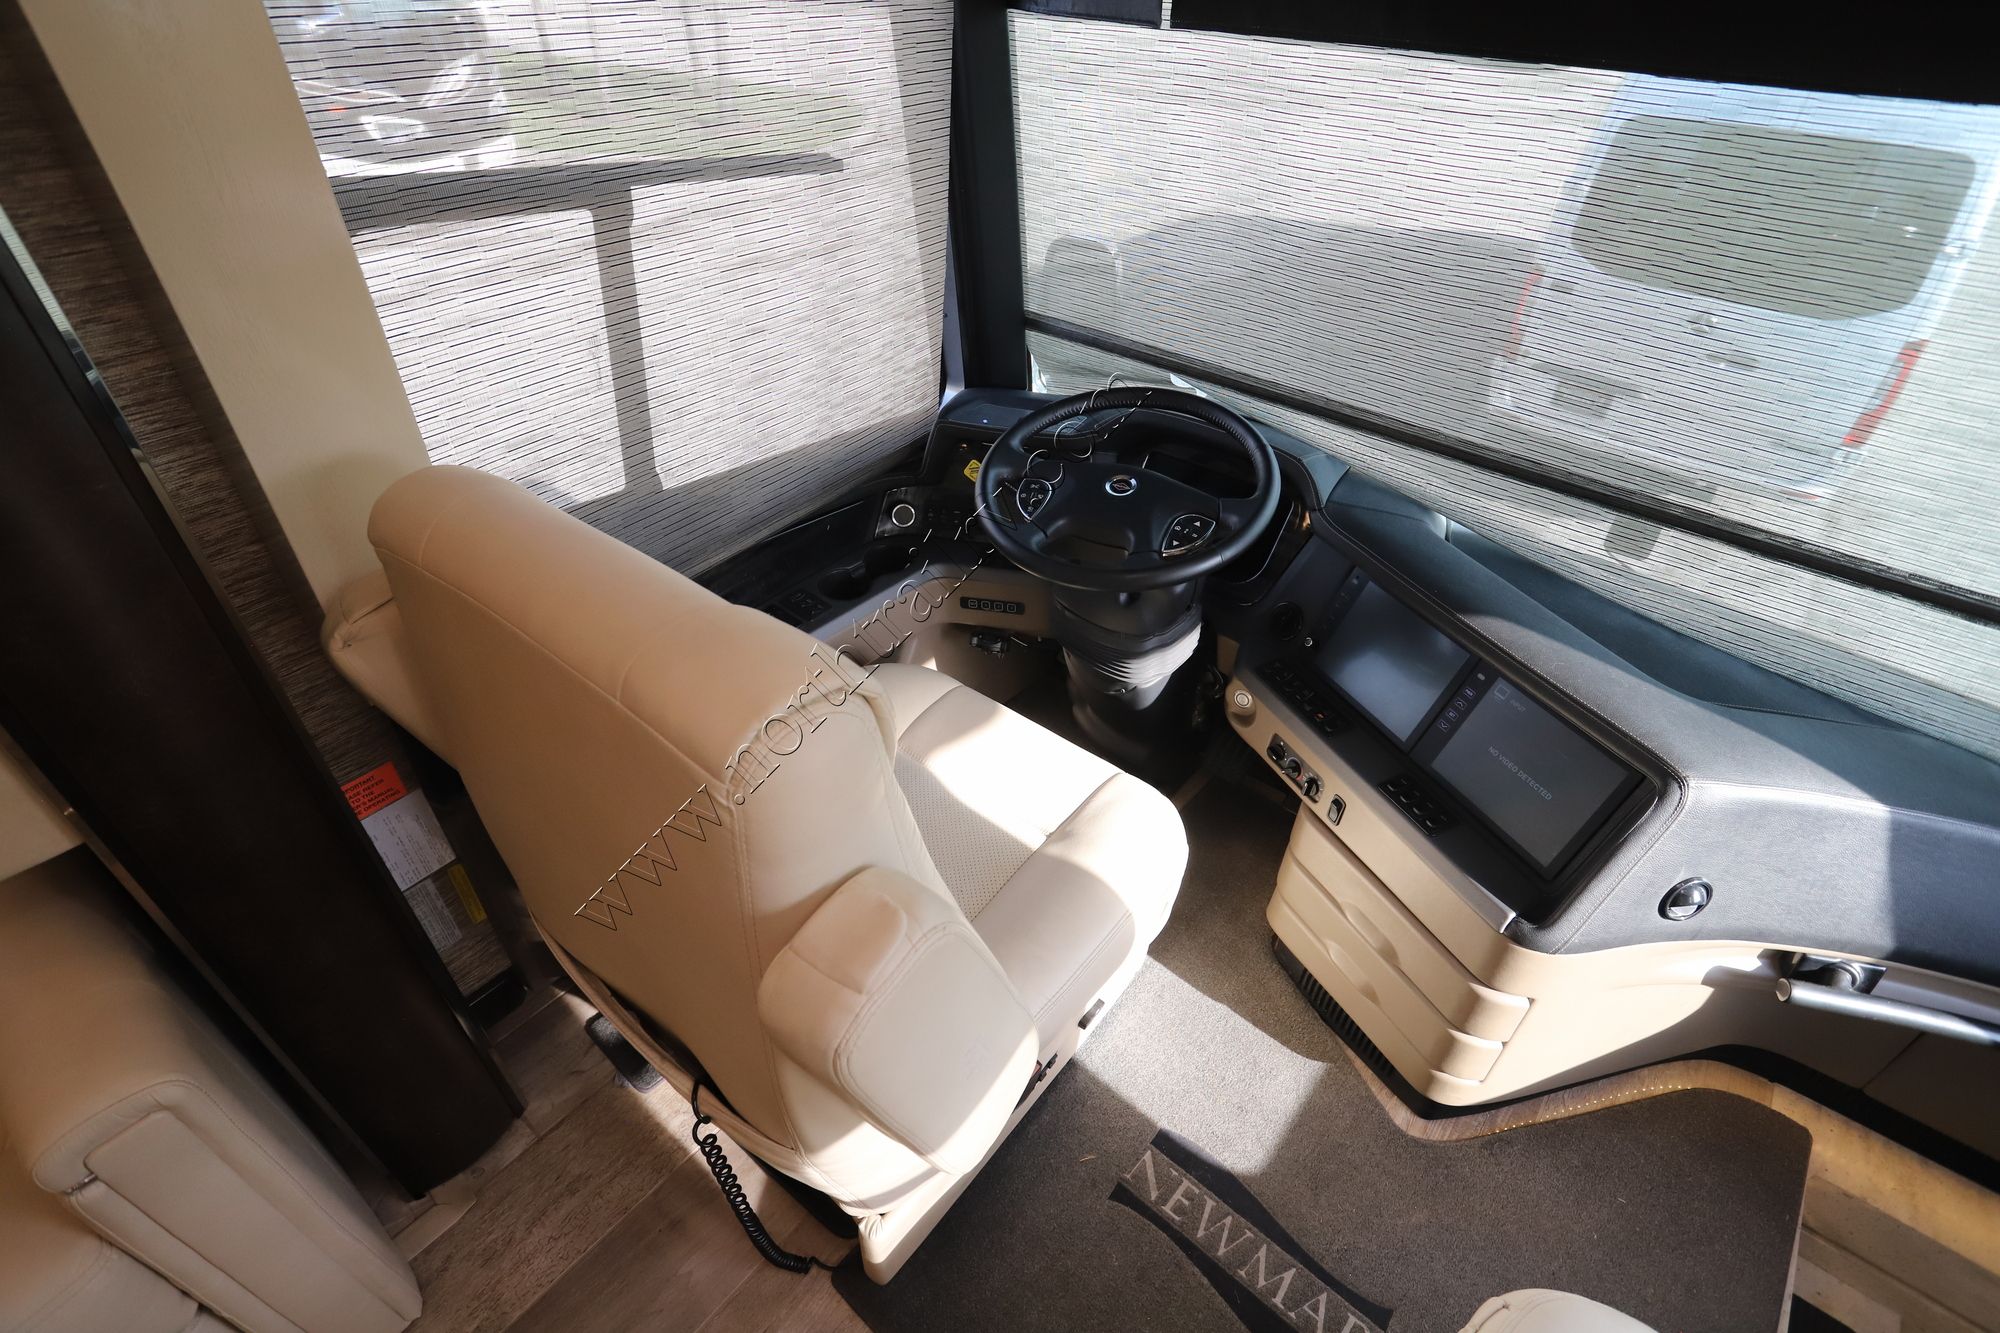 Used 2019 Newmar King Aire 4533 Class A  For Sale